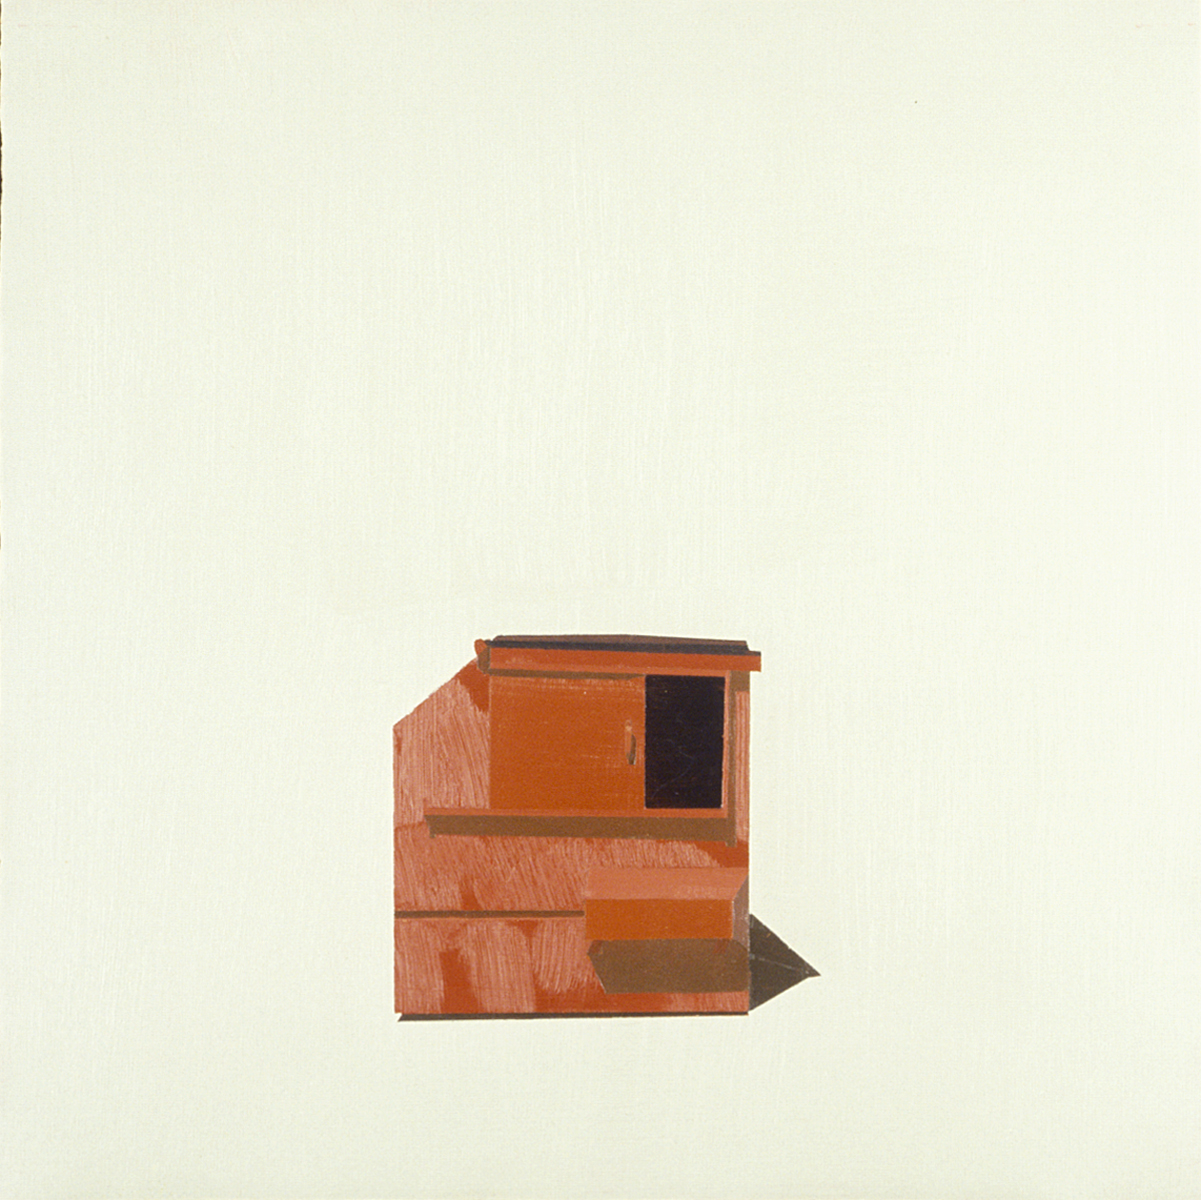   CANYON REDROCK DUMPSTER IN SUBTLE TAUPE   oil on paper " | 15" x 15" 2003 